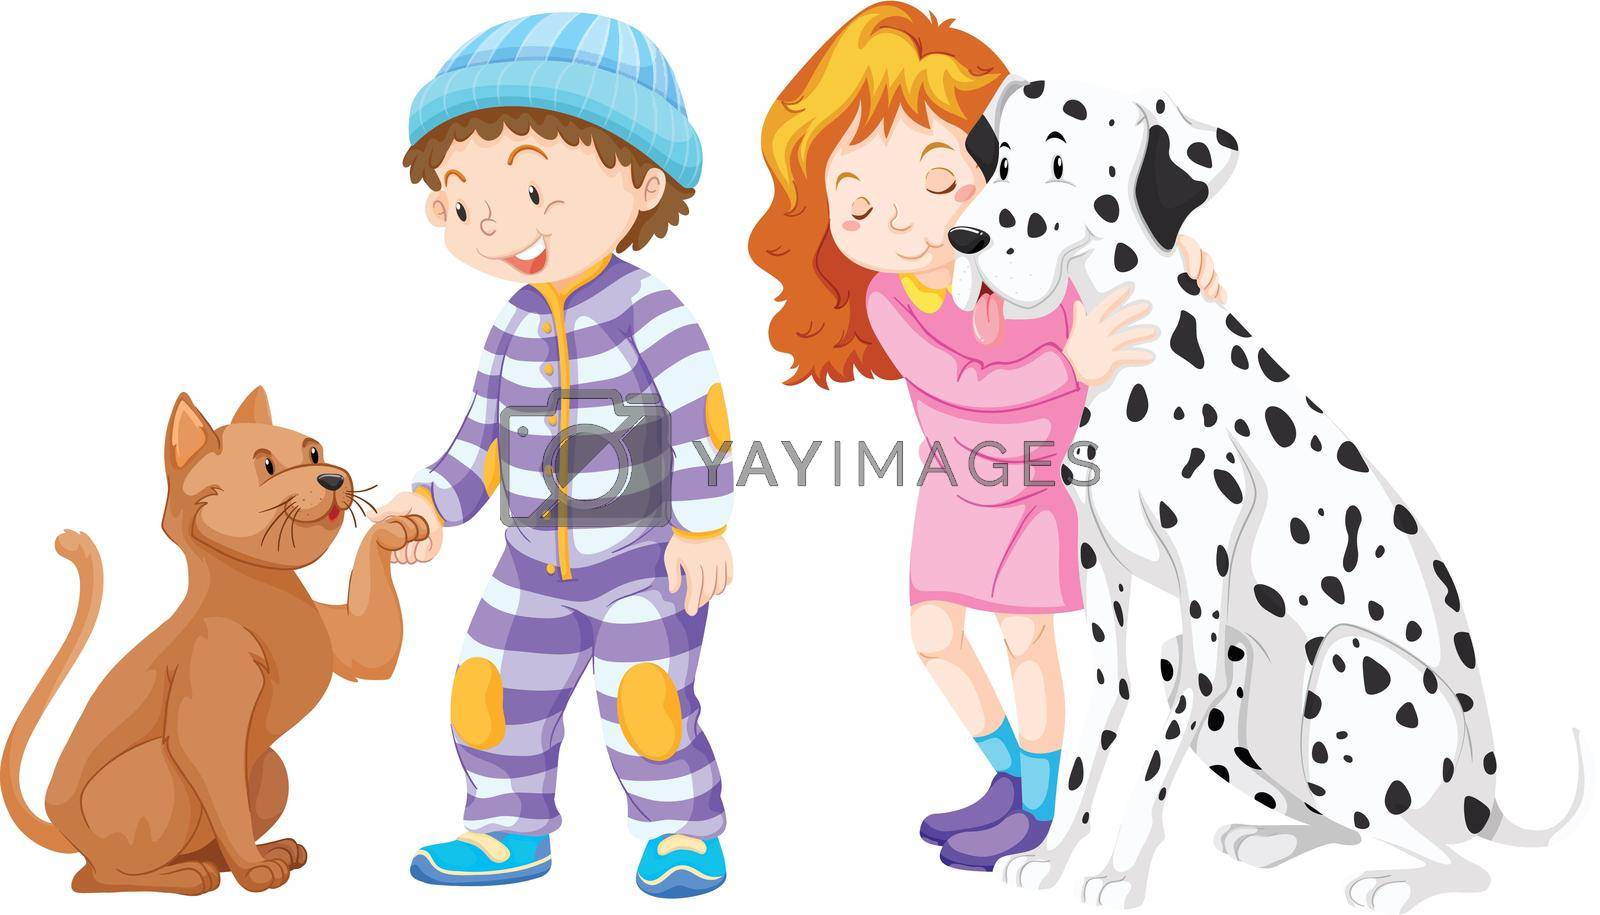 Children and their pets illustration